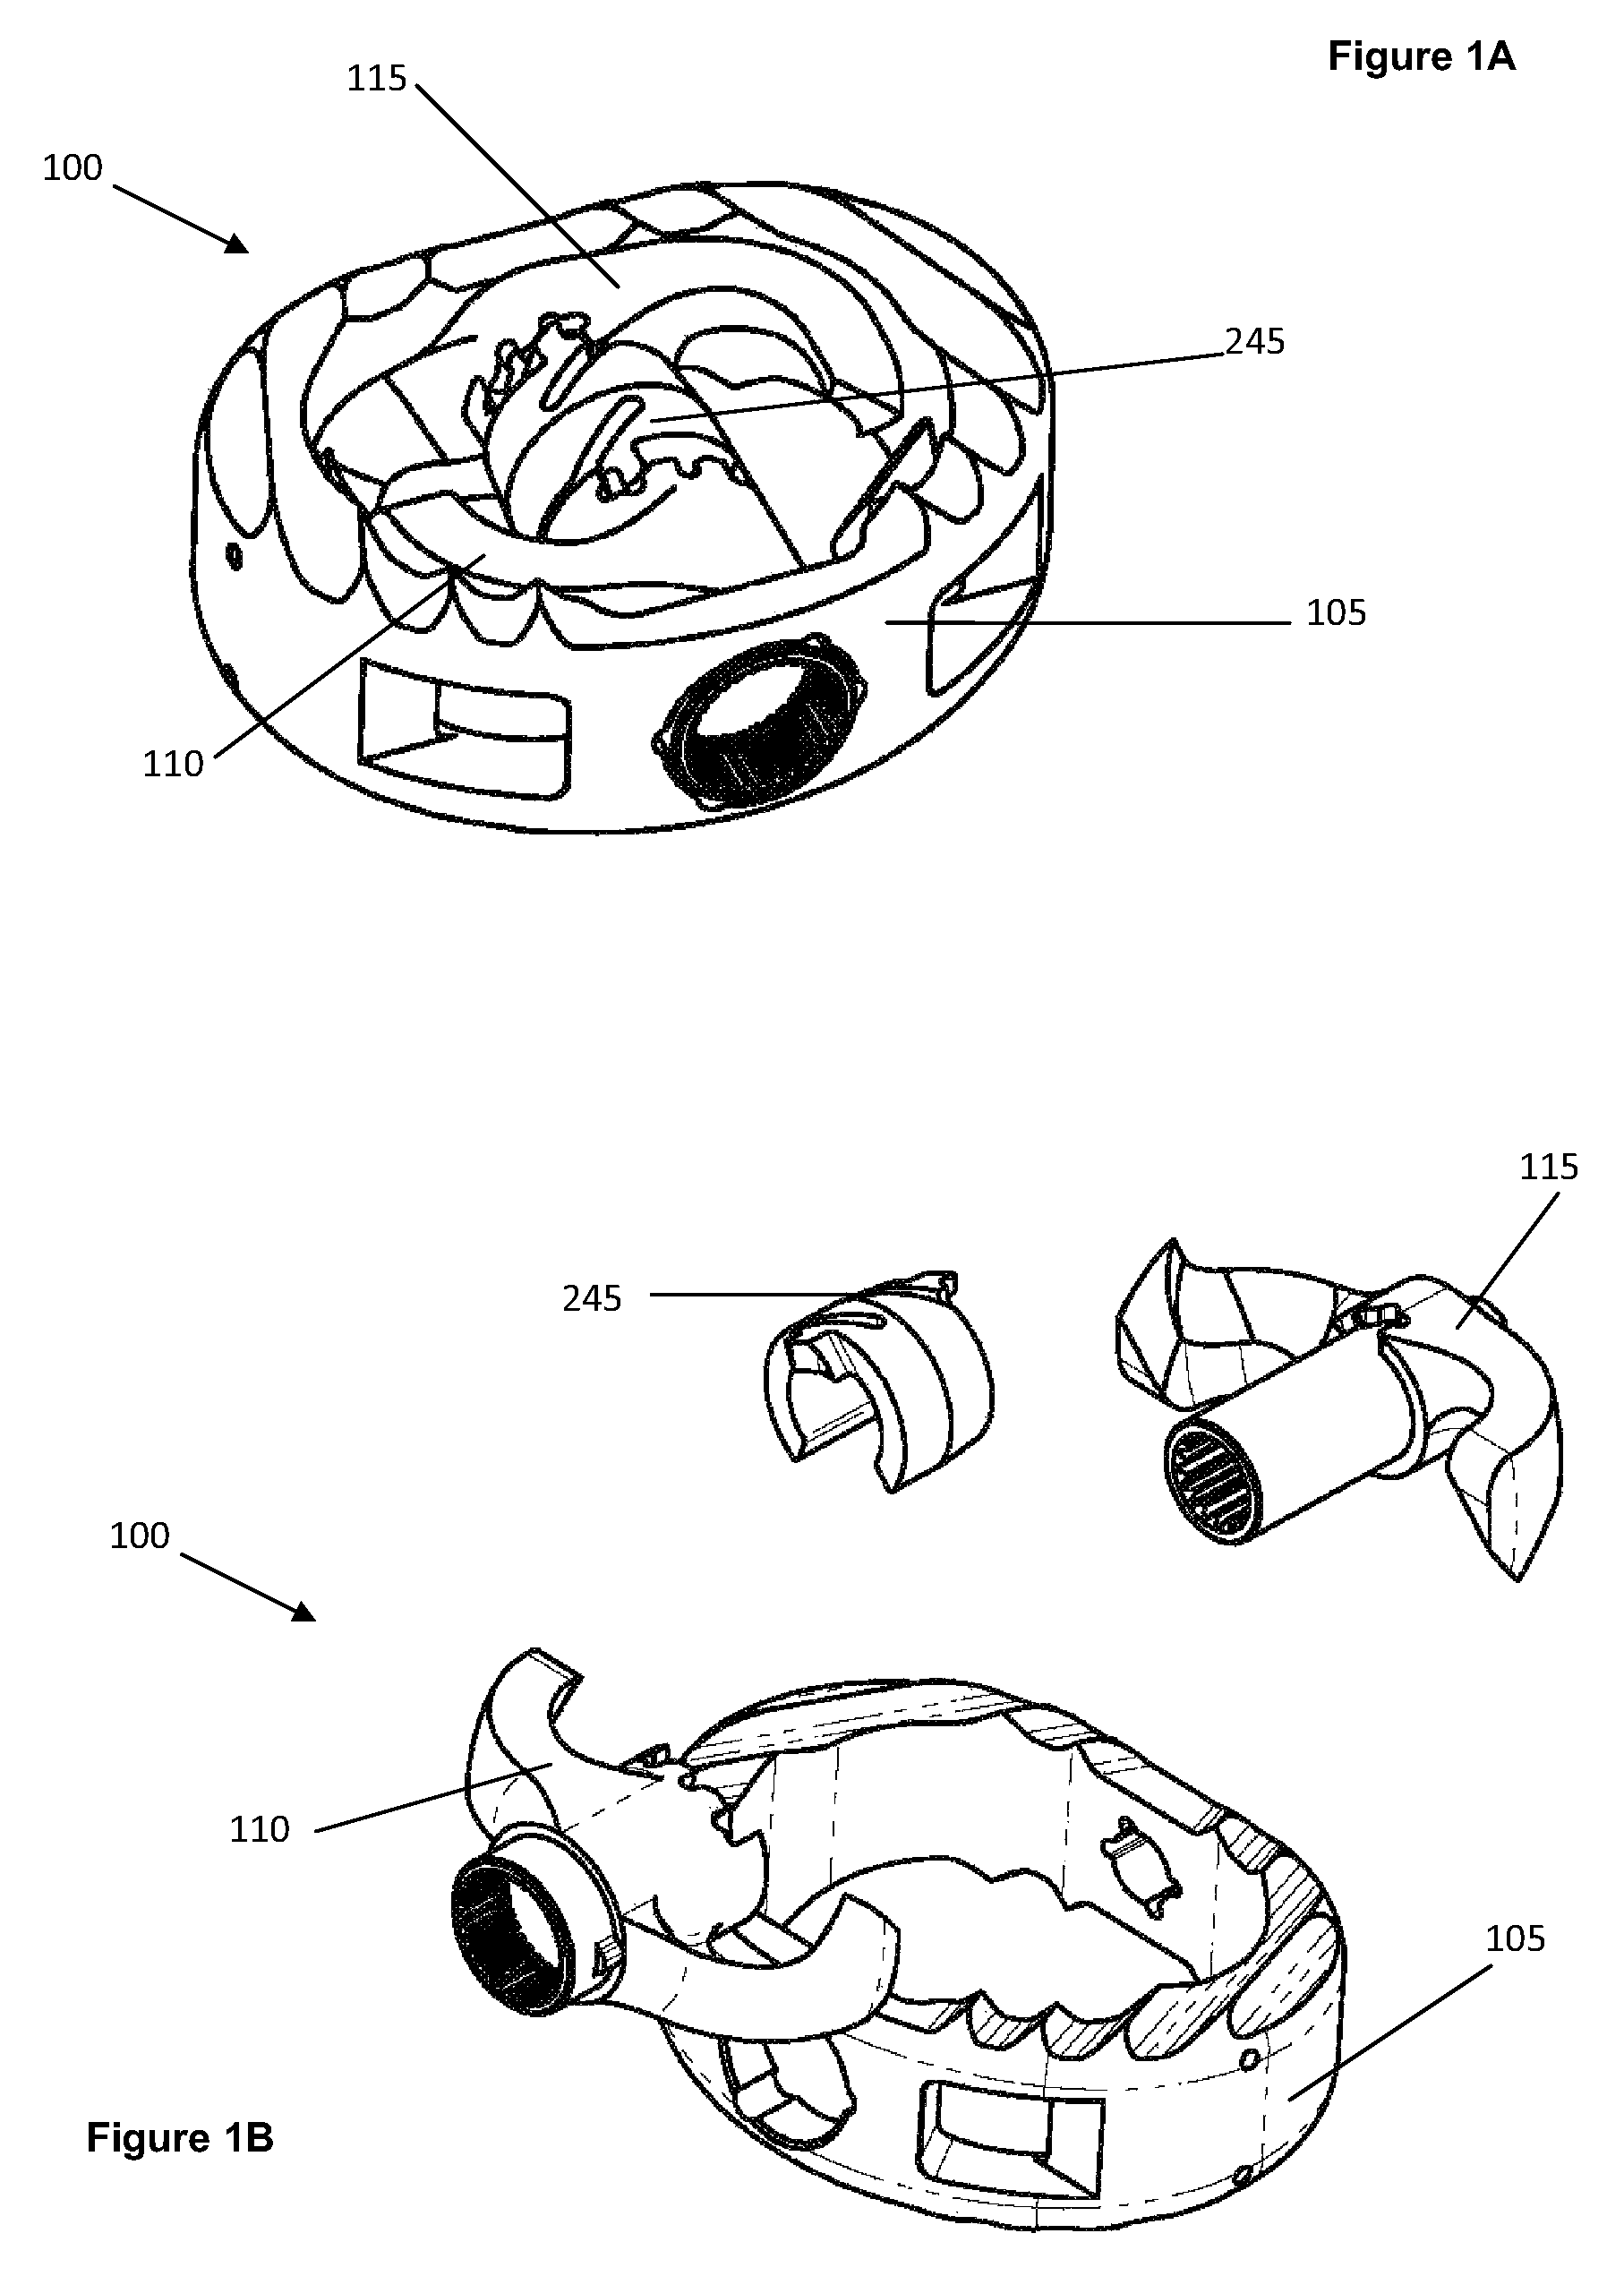 Stand-alone interbody fixation system